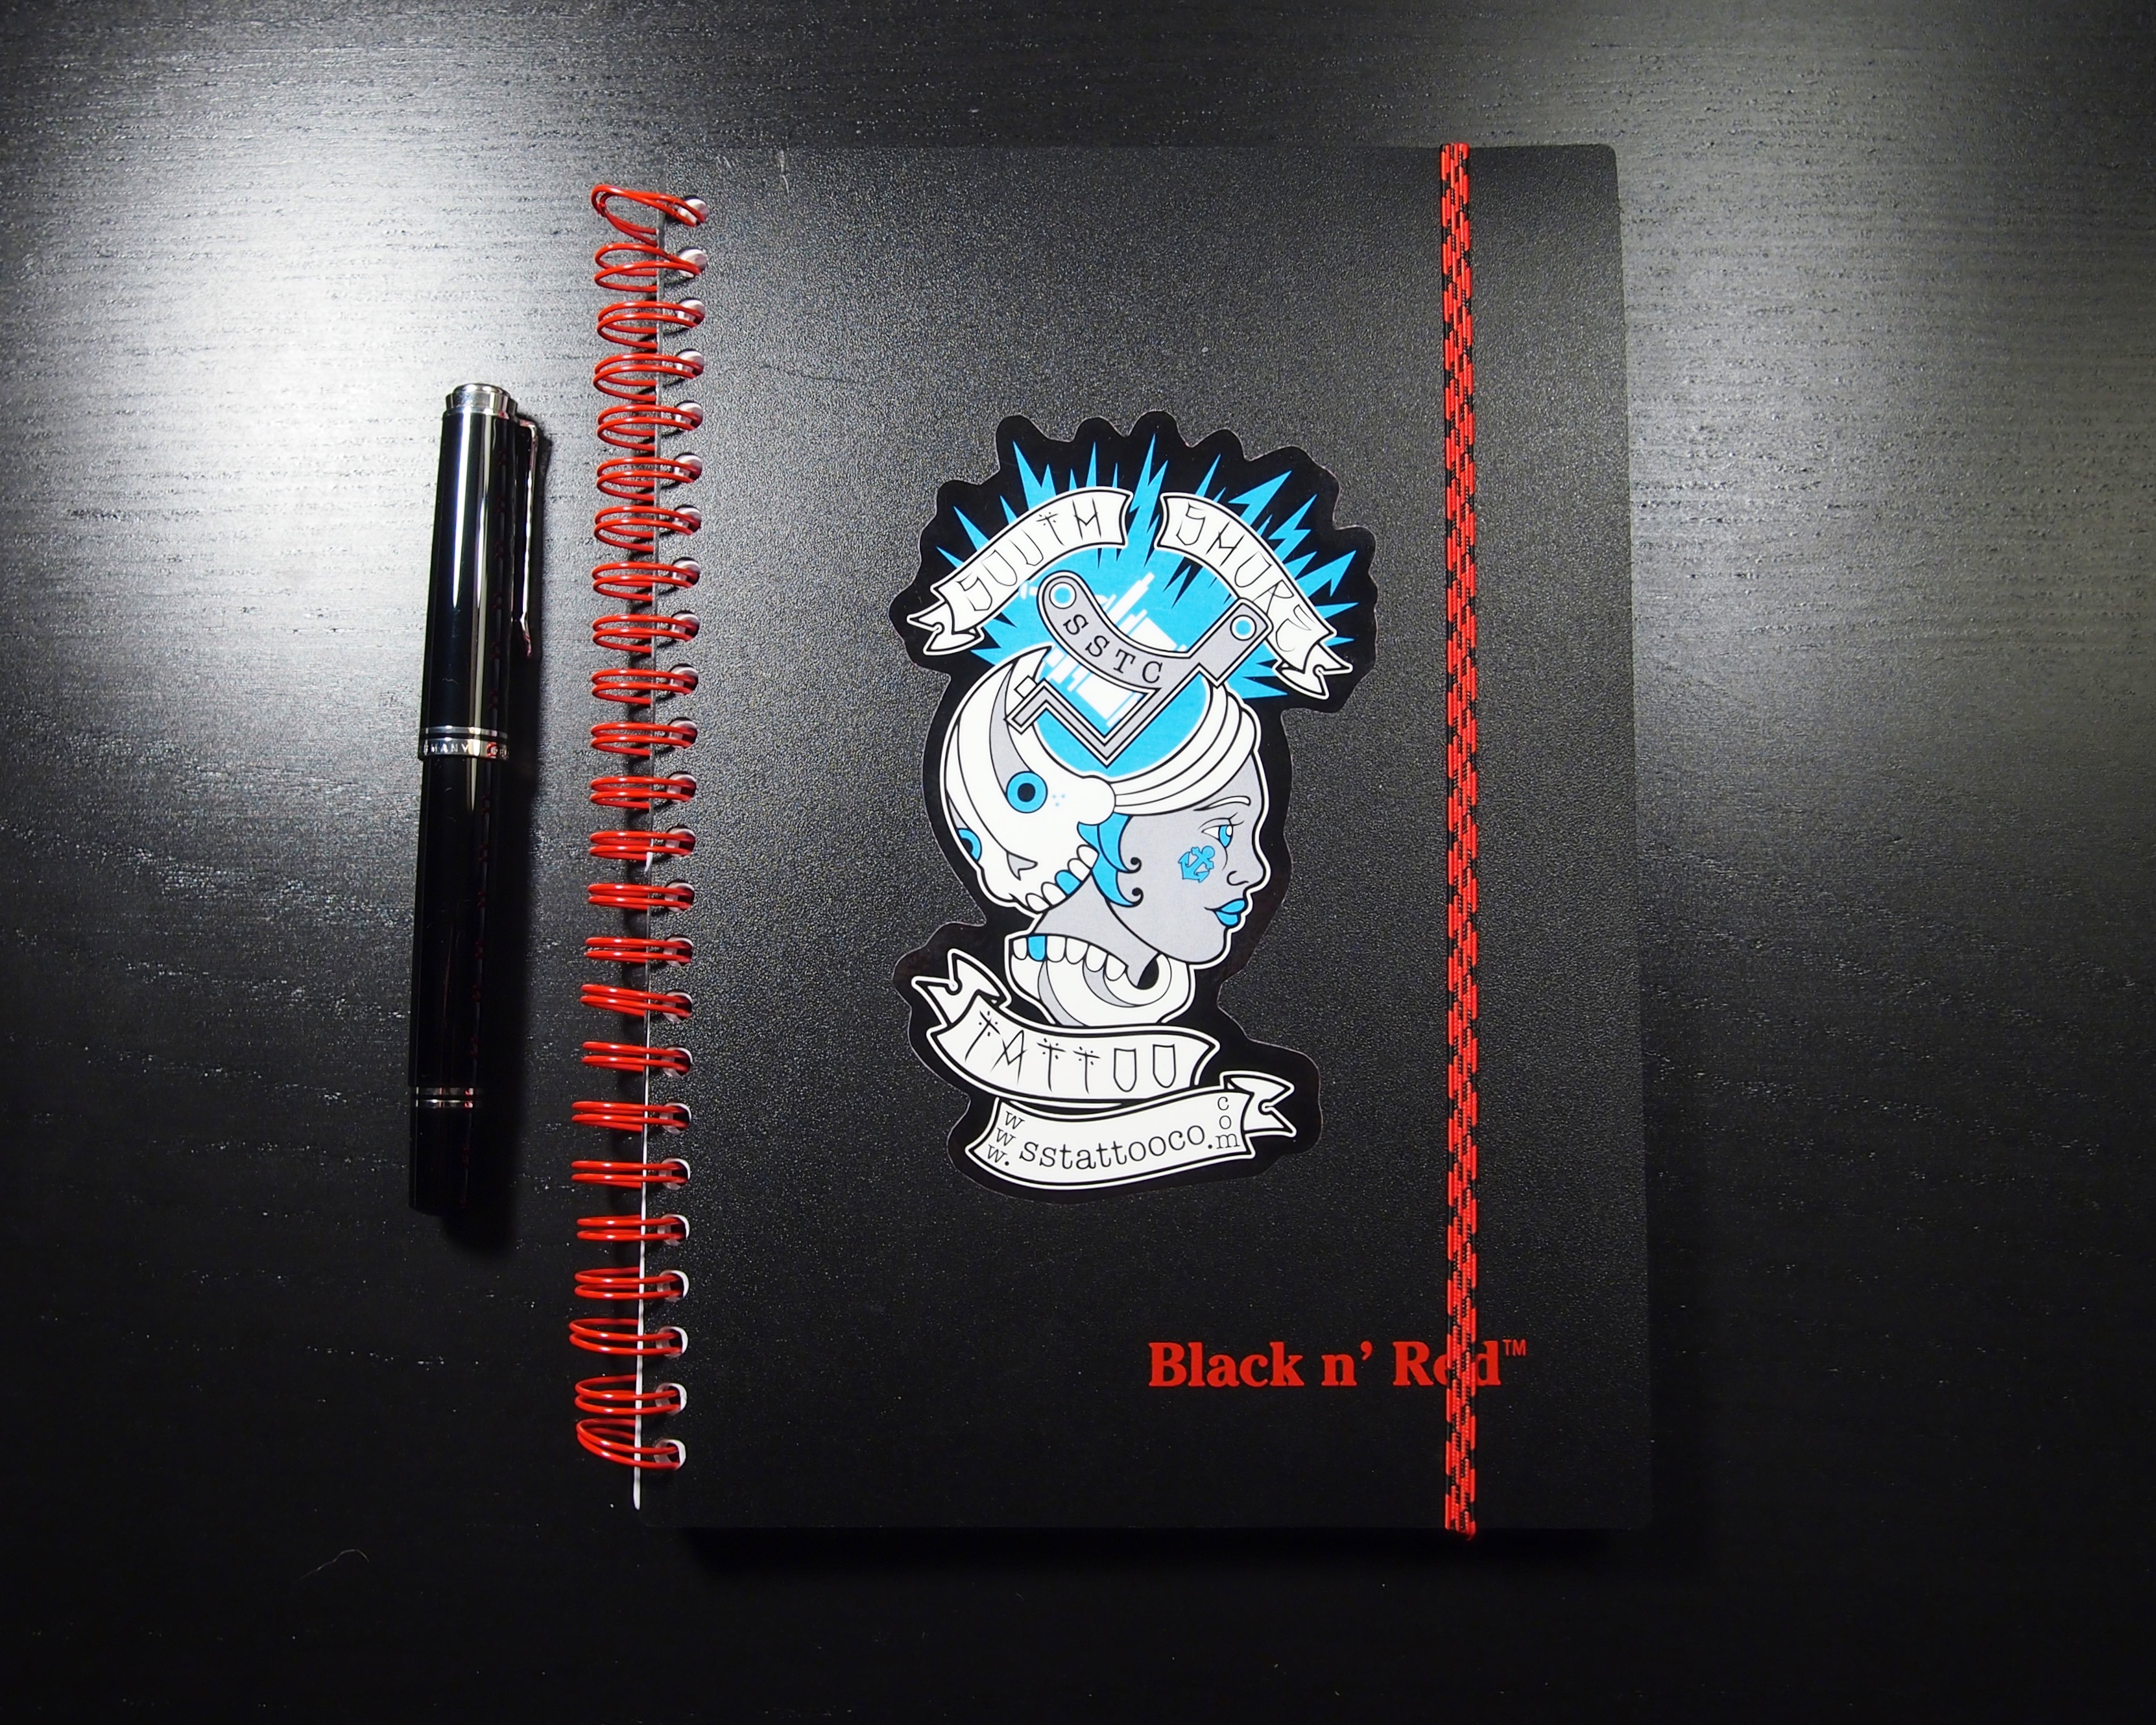 The Black n’ Red by Hamelin A5 (8.25″x5.875″) Notebook –
Handwritten Review